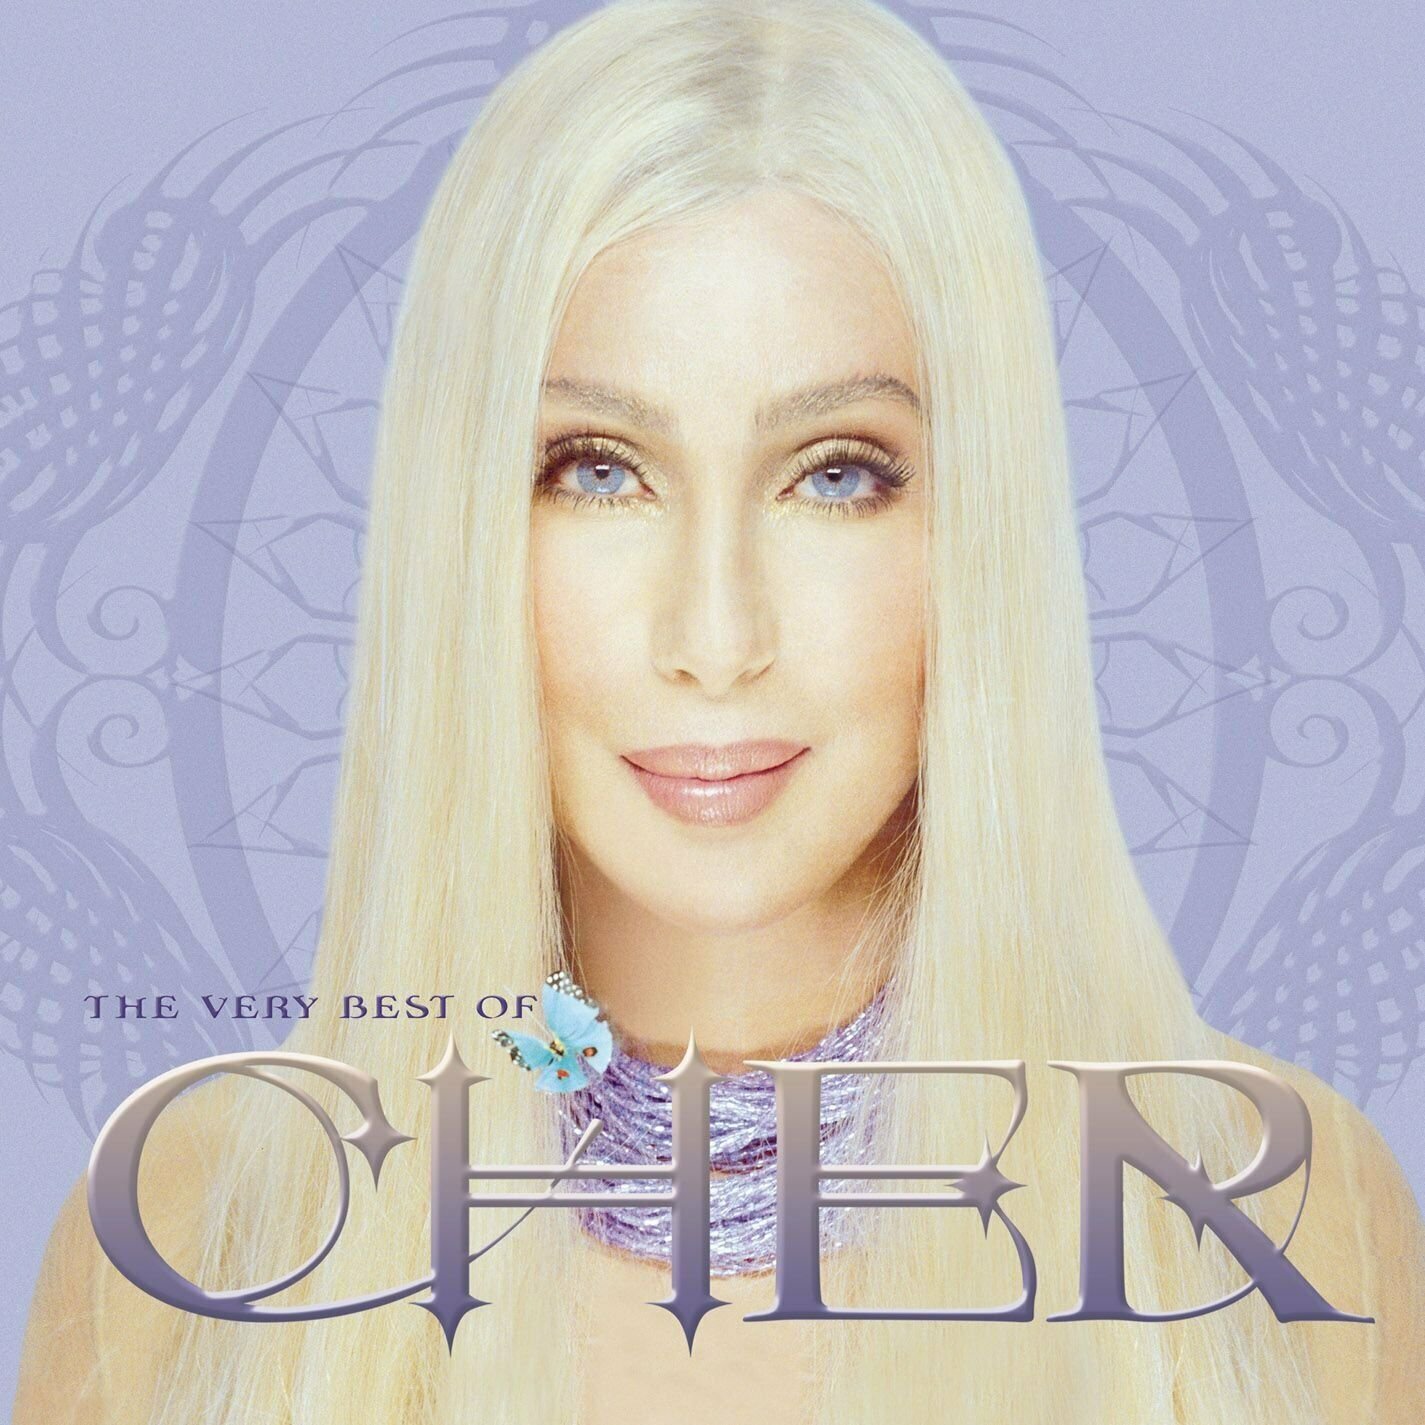 Cher-The Very Best Of Cher-CD-FLAC-2003-FLACME